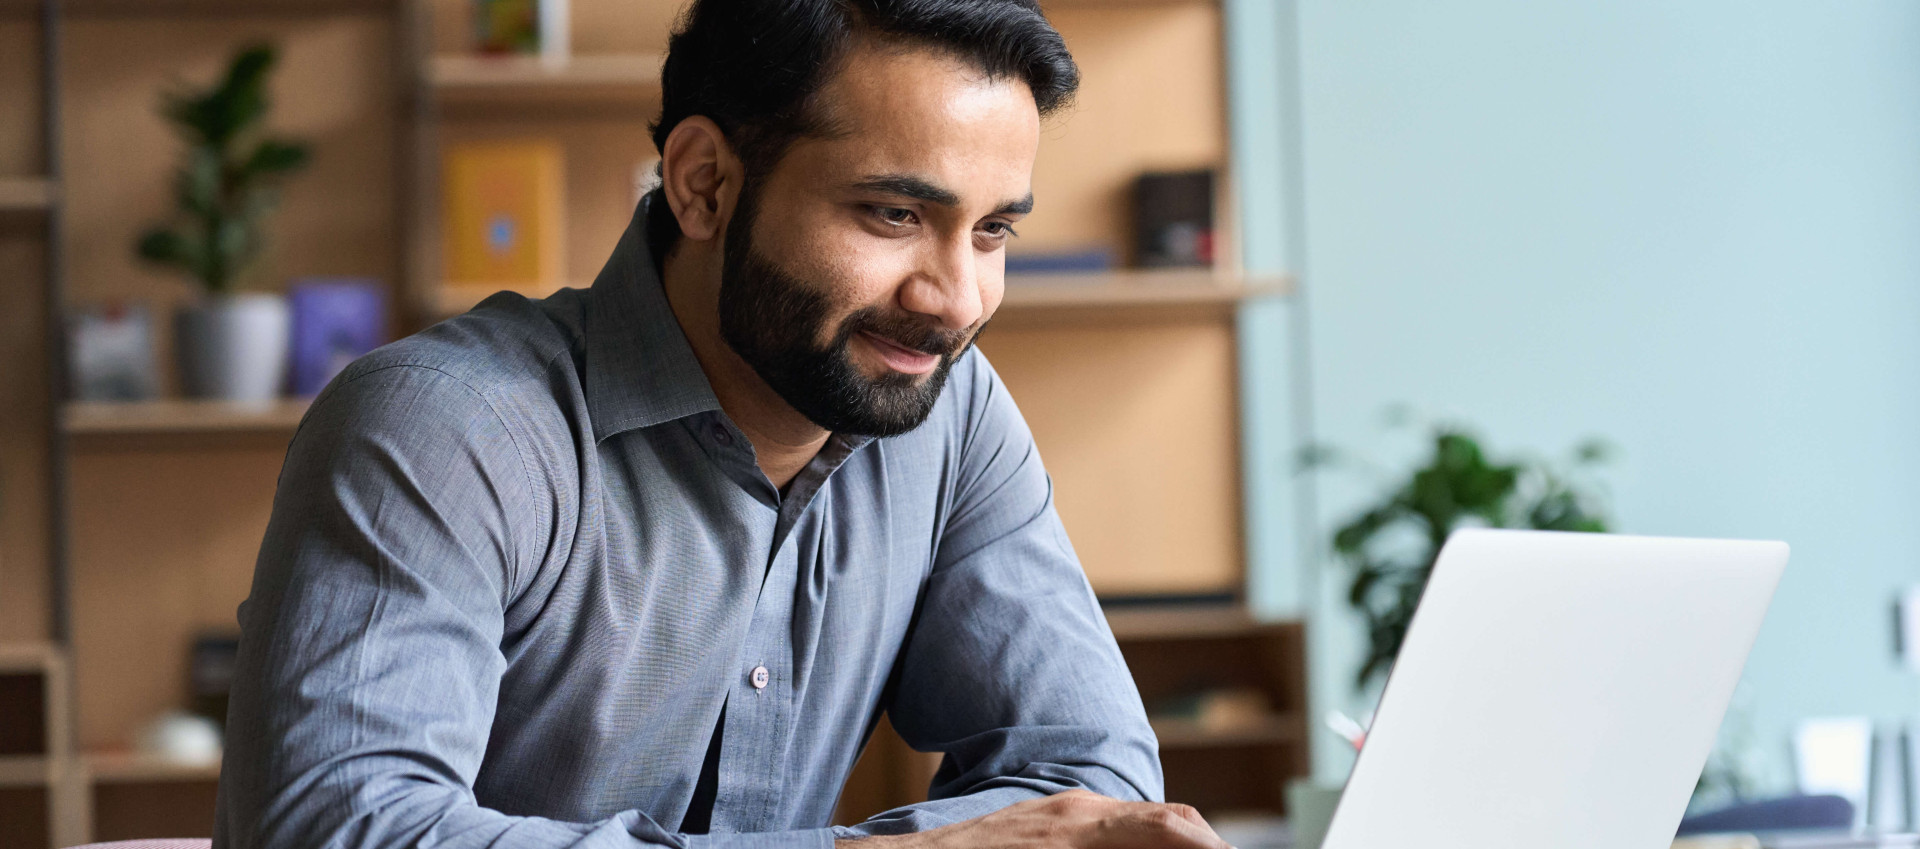 eye level view of bearded man in smart clothes smiling at laptop in an office